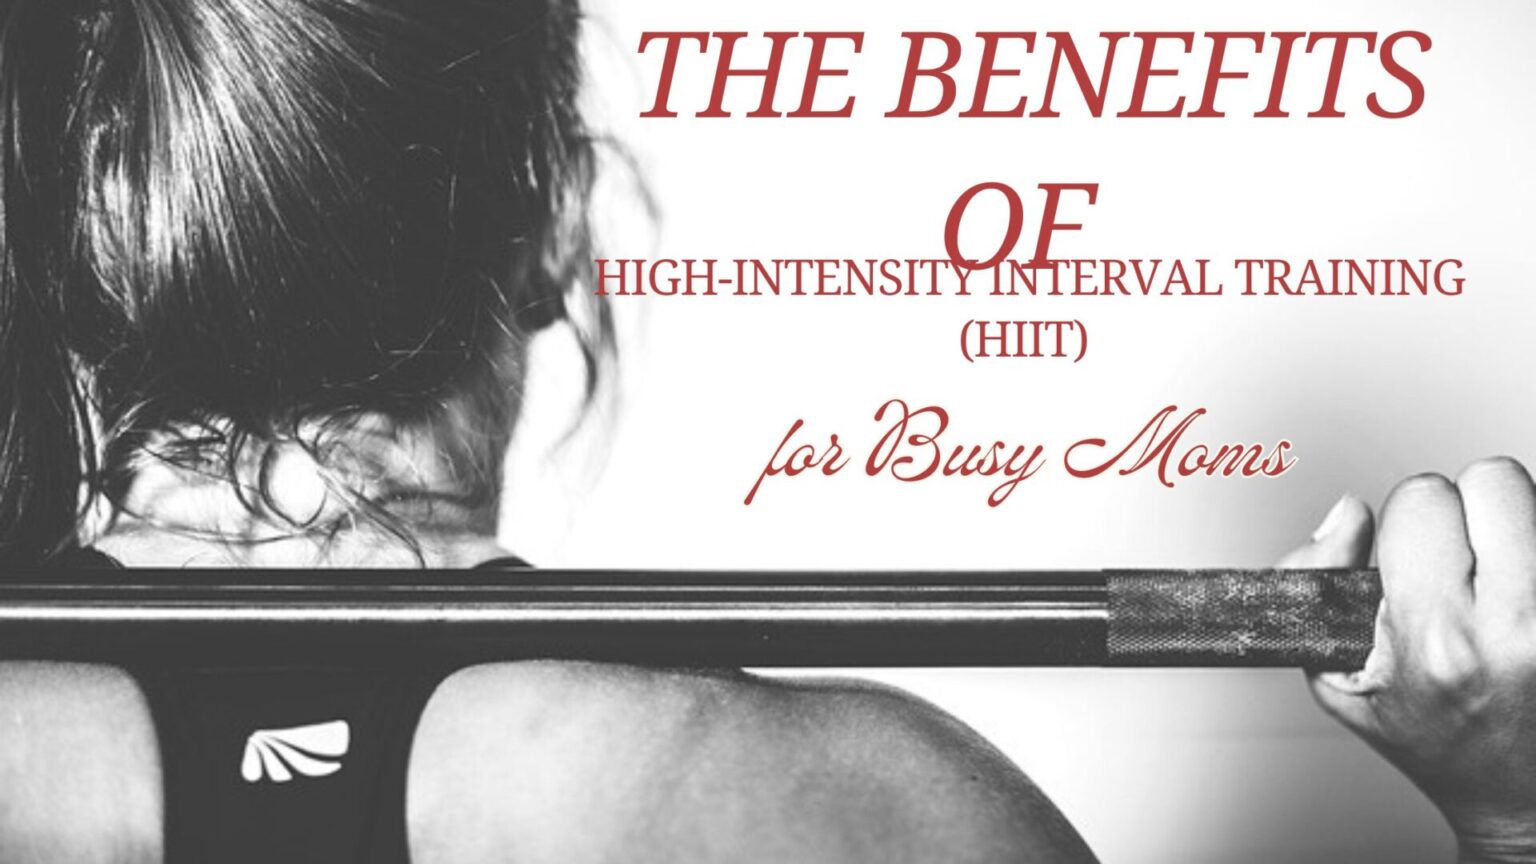 The Benefits of High-Intensity Interval Training (HIIT) for Busy Moms